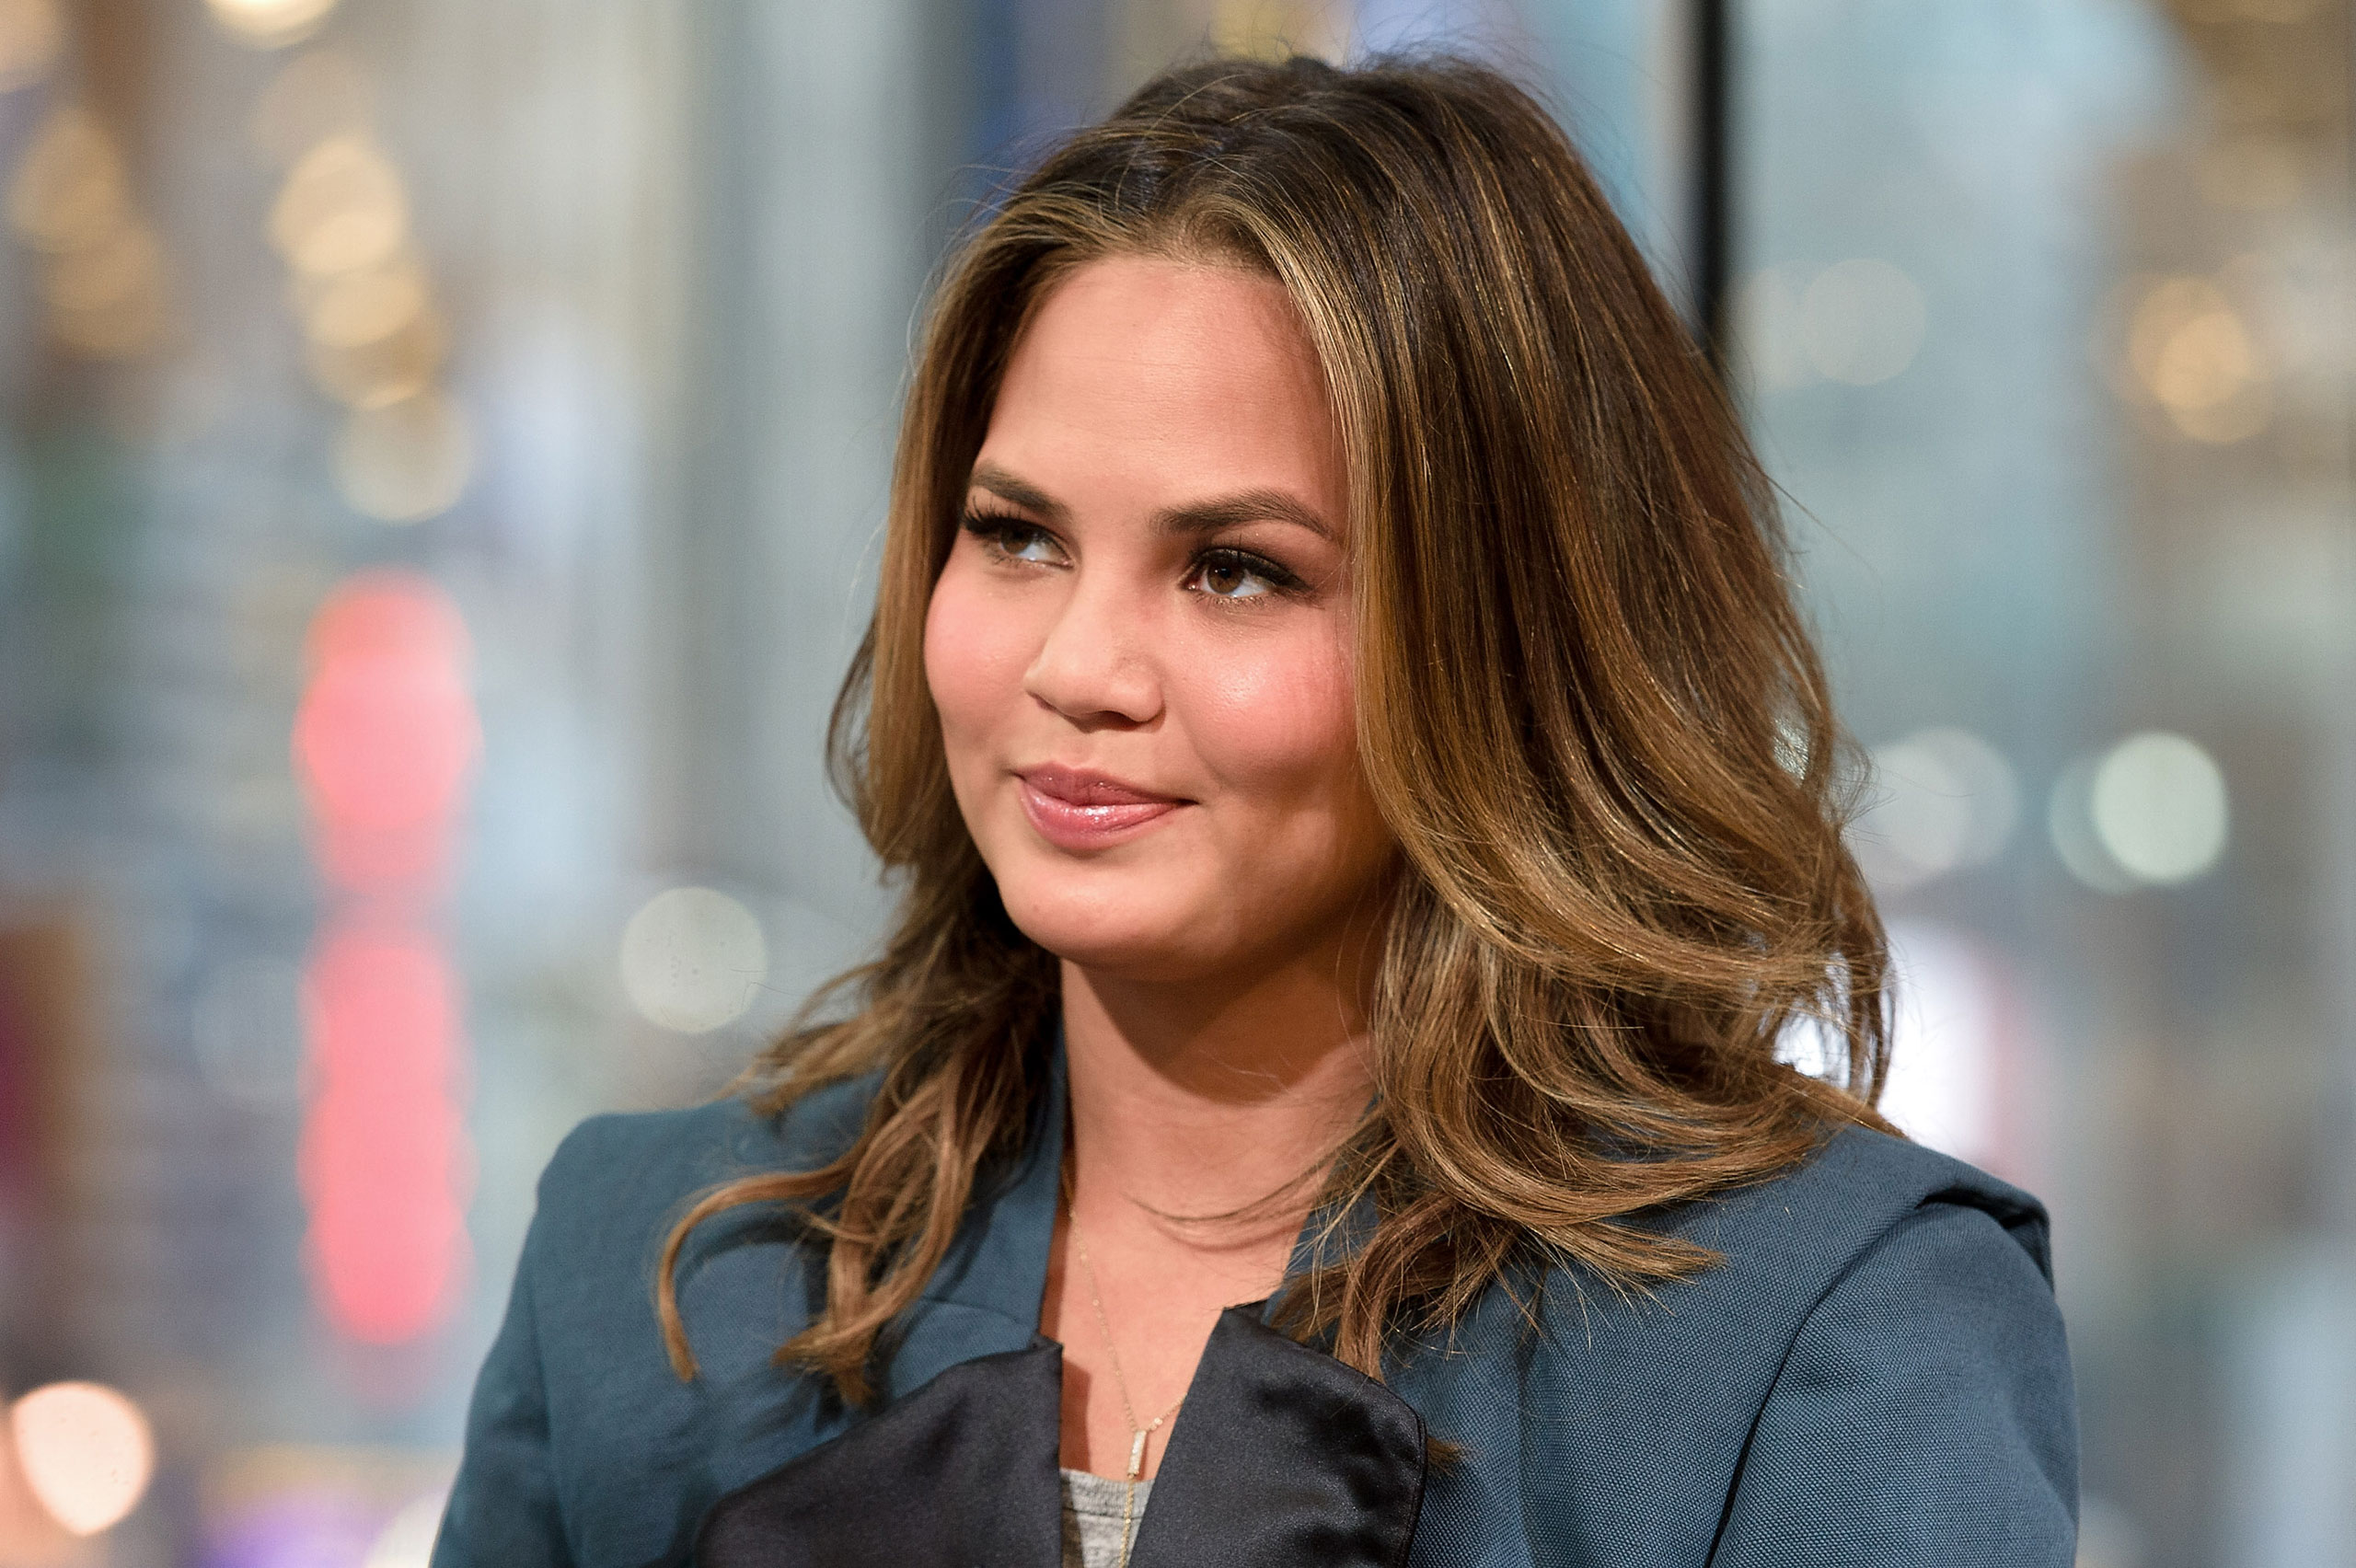 People have sorely messed up the definition of feminism. It isn’t saying this is wrong and this is right,  said Chrissy Teigen during a Variety event in 2014, adding that husband John Legend also identifies:  He’s a bigger feminist than I am! He actually teaches me a lot about the way women should be perceived.